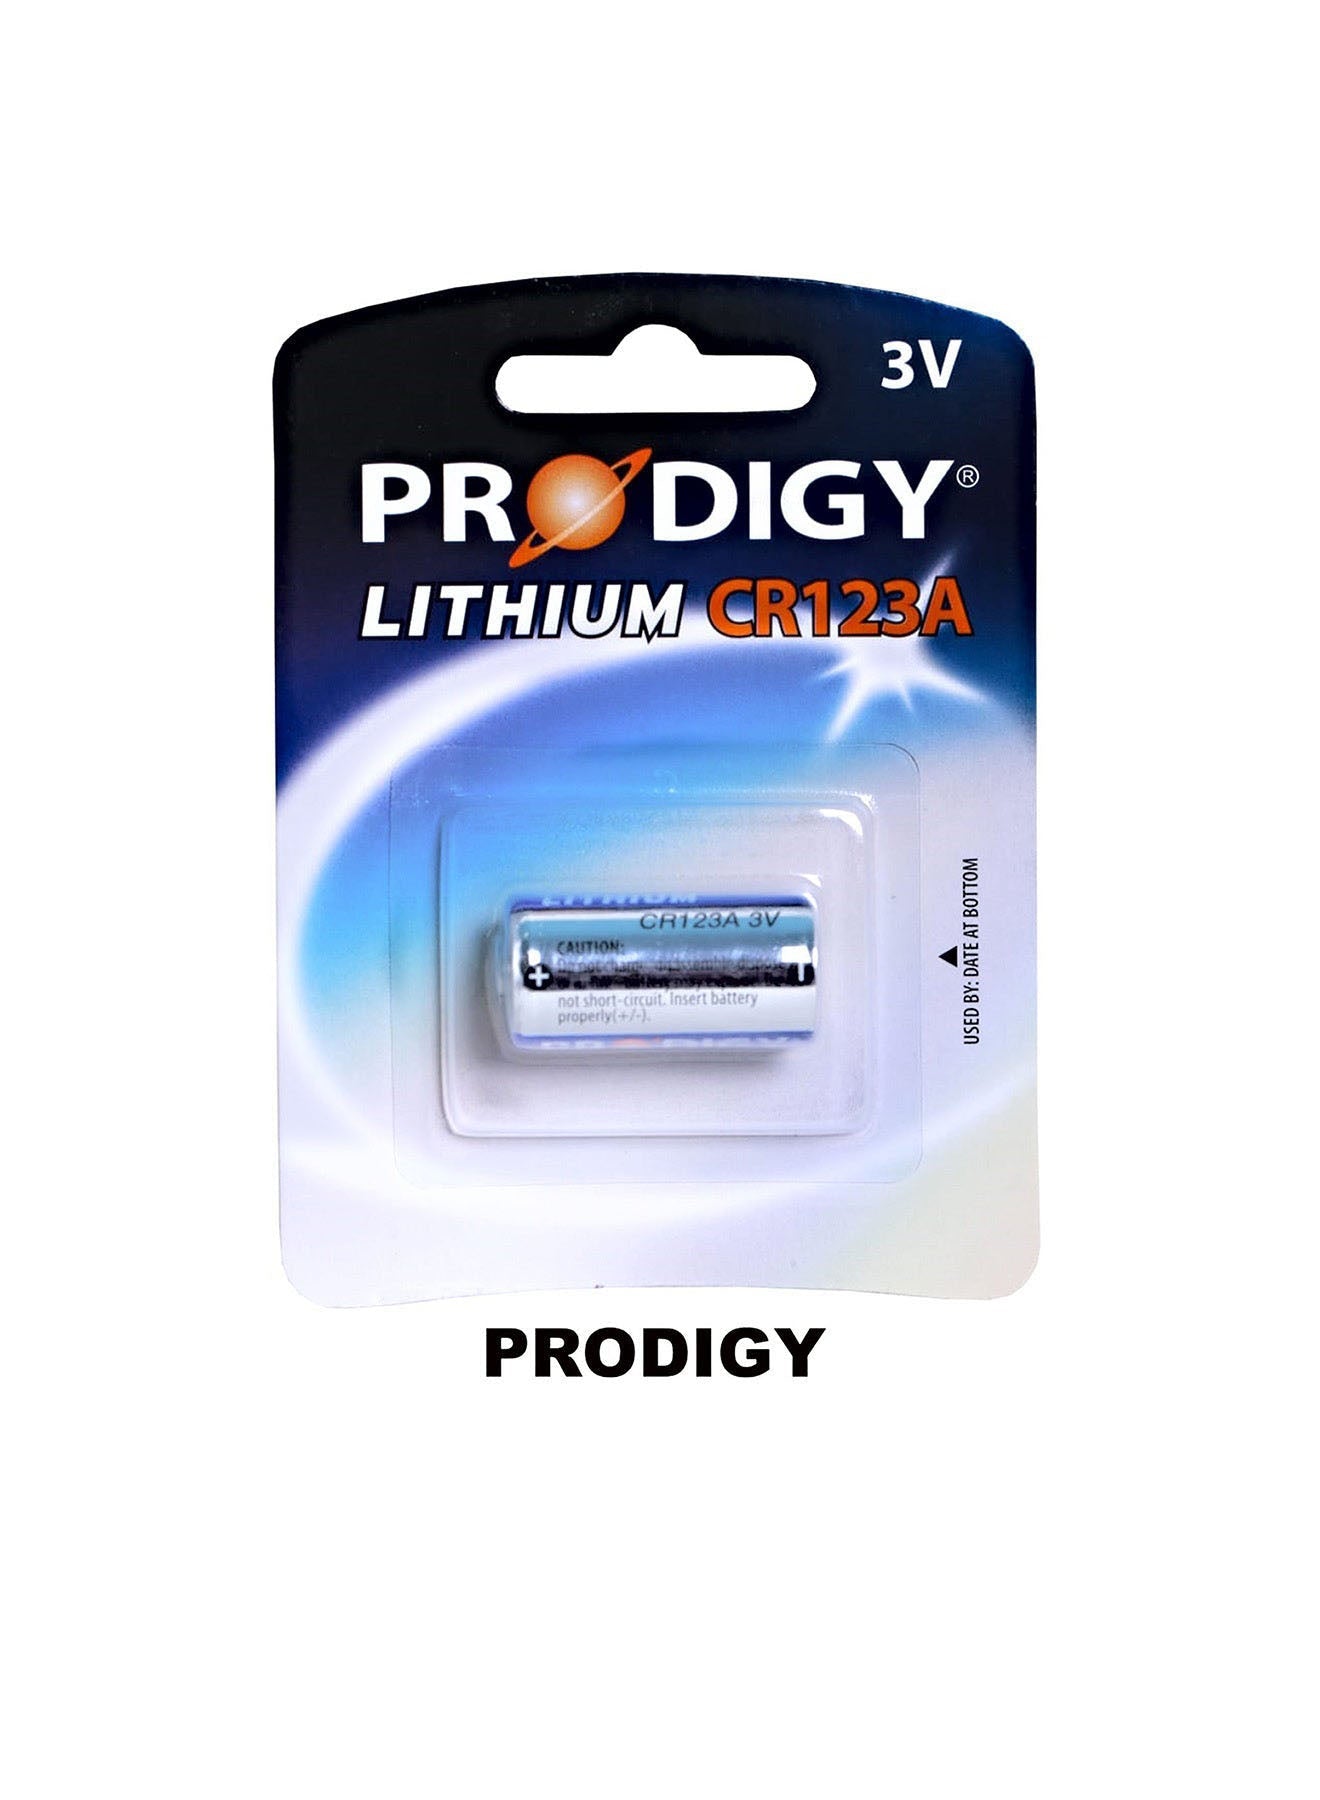 Prodigy Lithium CR123A 3V Value Pack of 3 